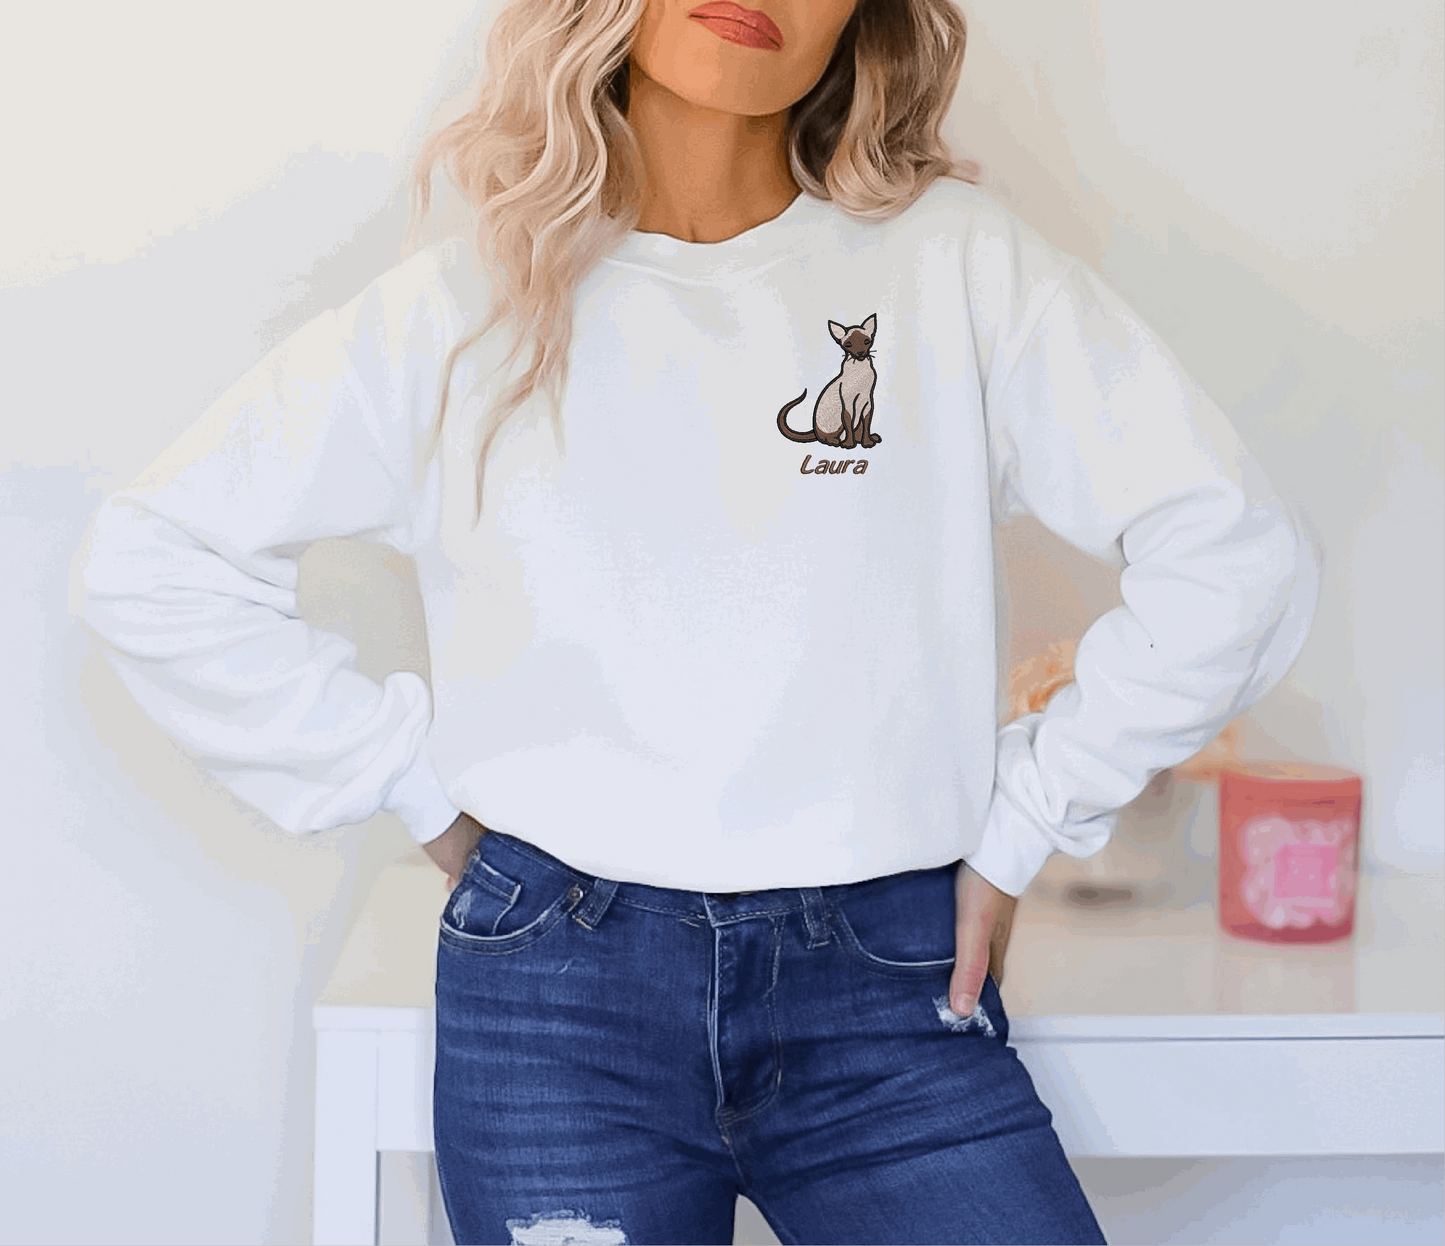 a woman wearing a white sweatshirt with a cat on it